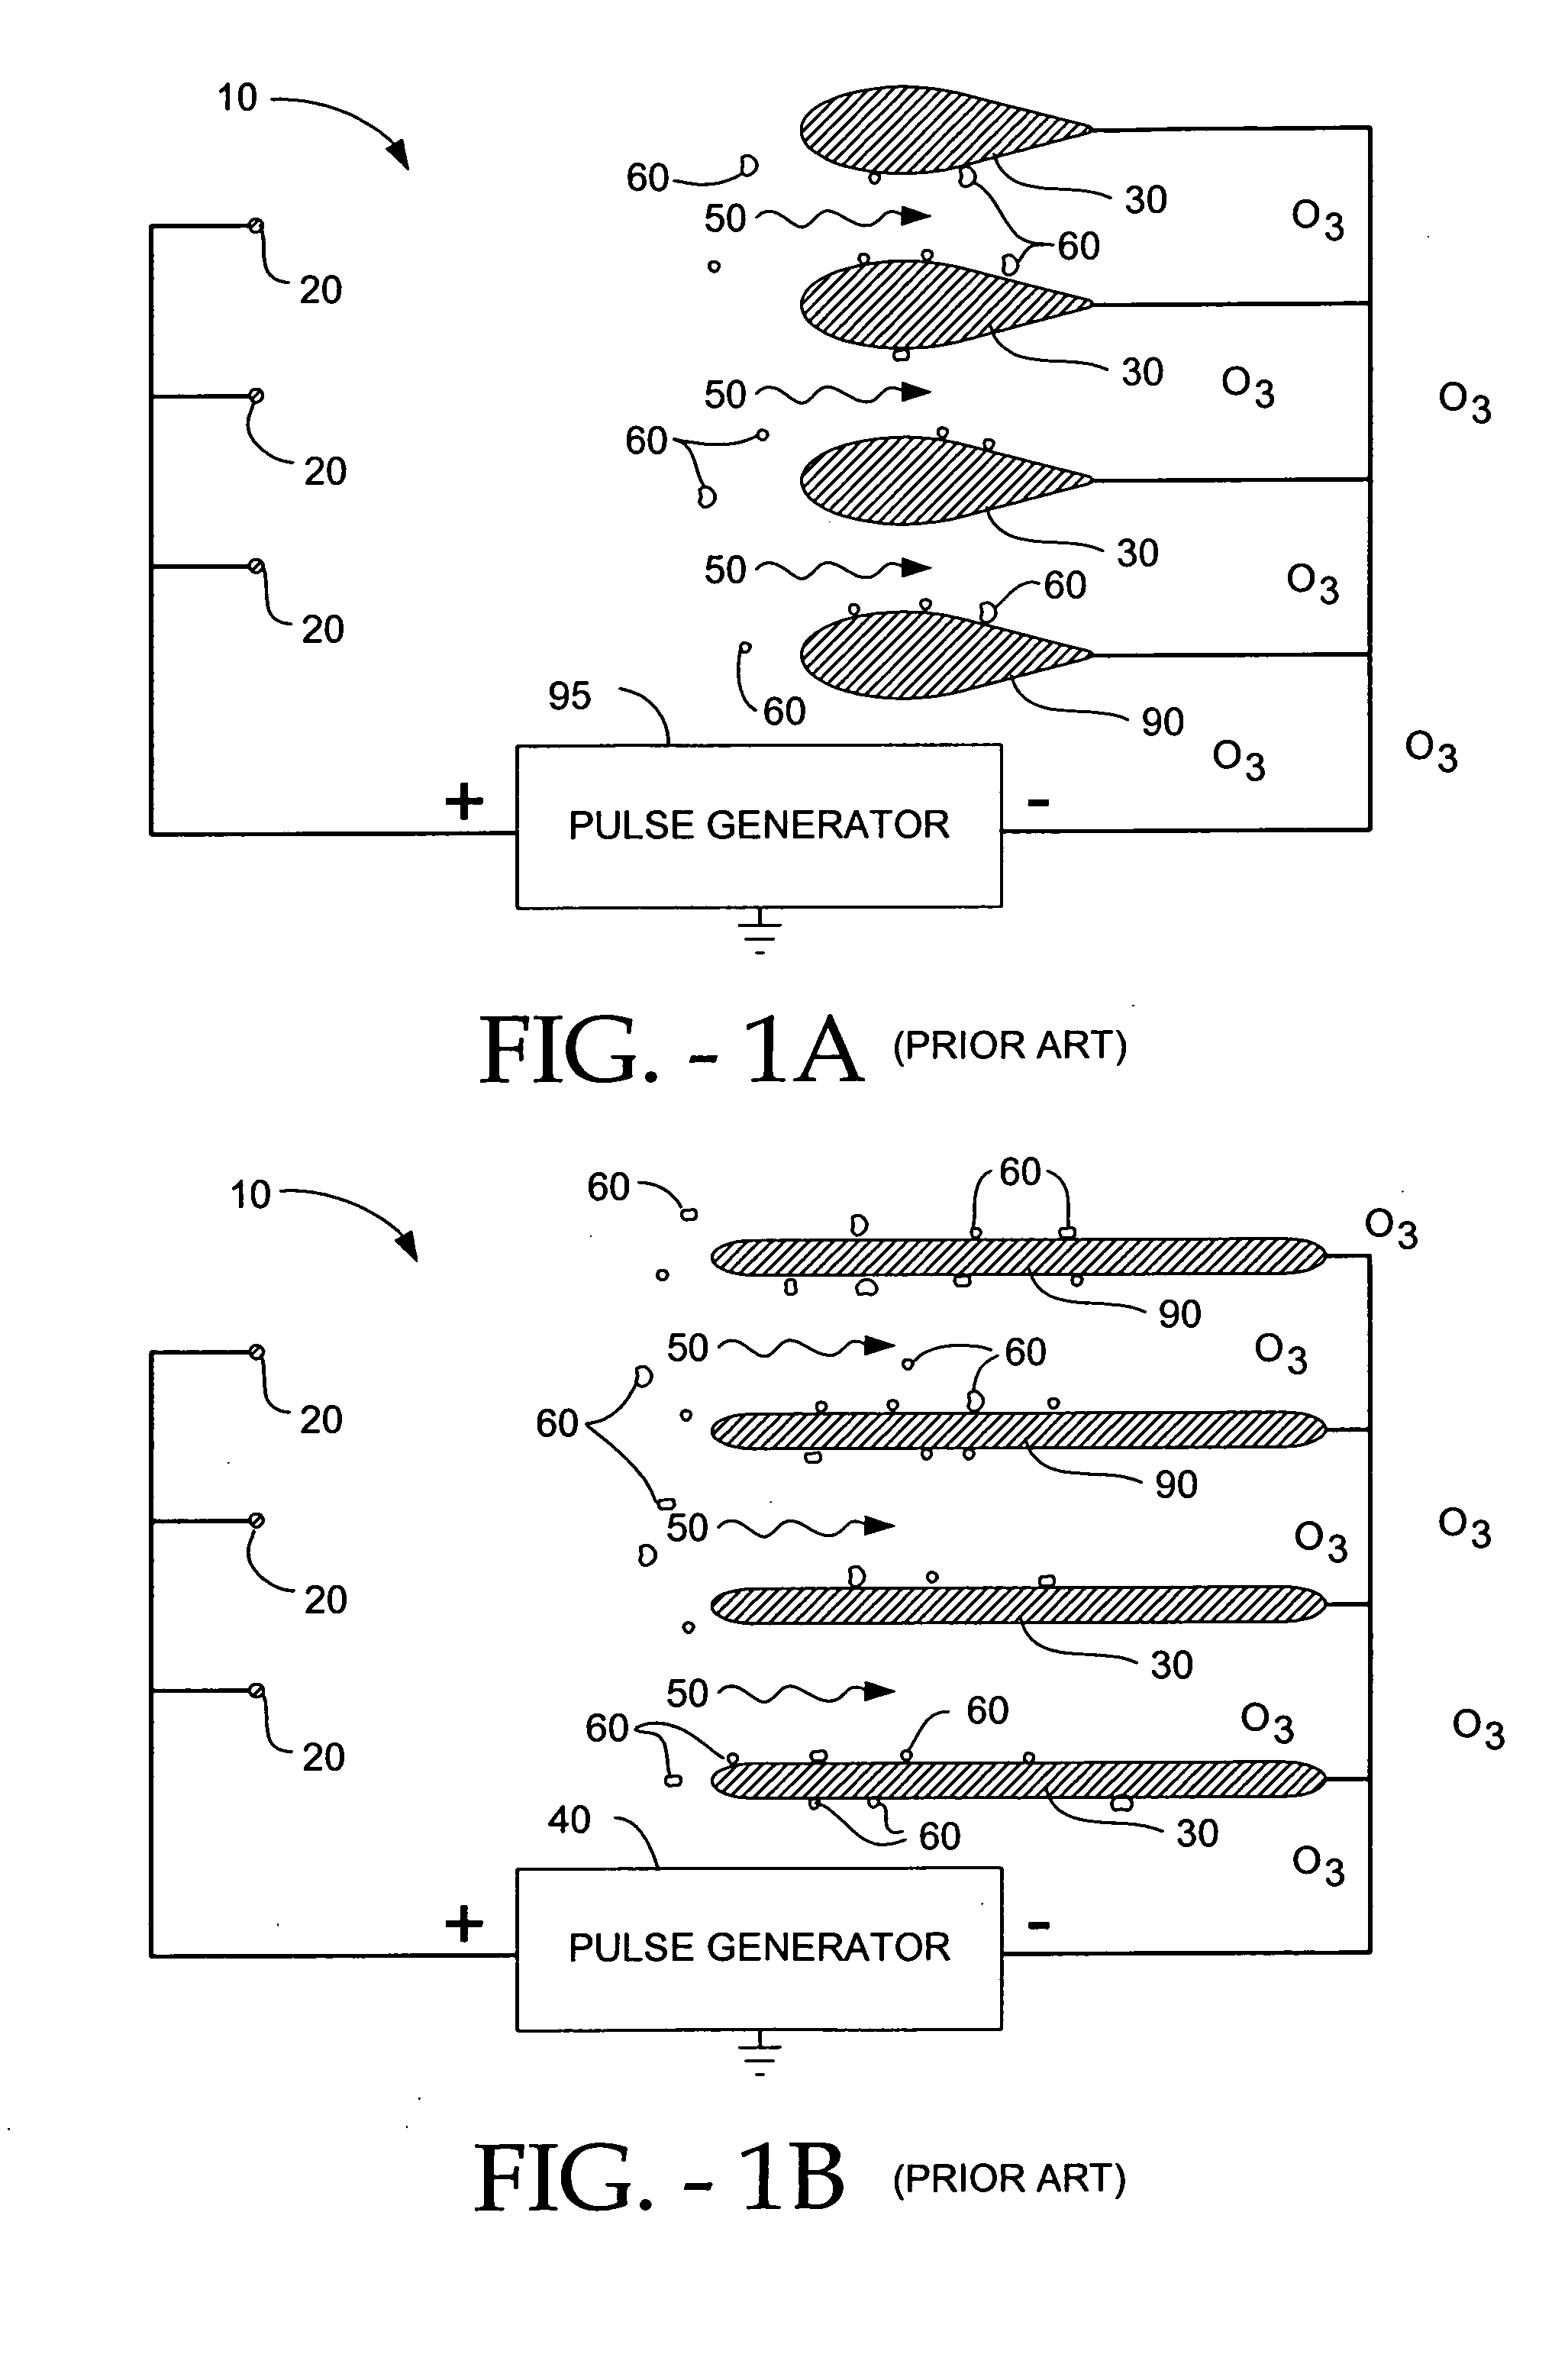 Electro-kinetic air transporter-conditioner devices with electrically conductive foam emitter electrode